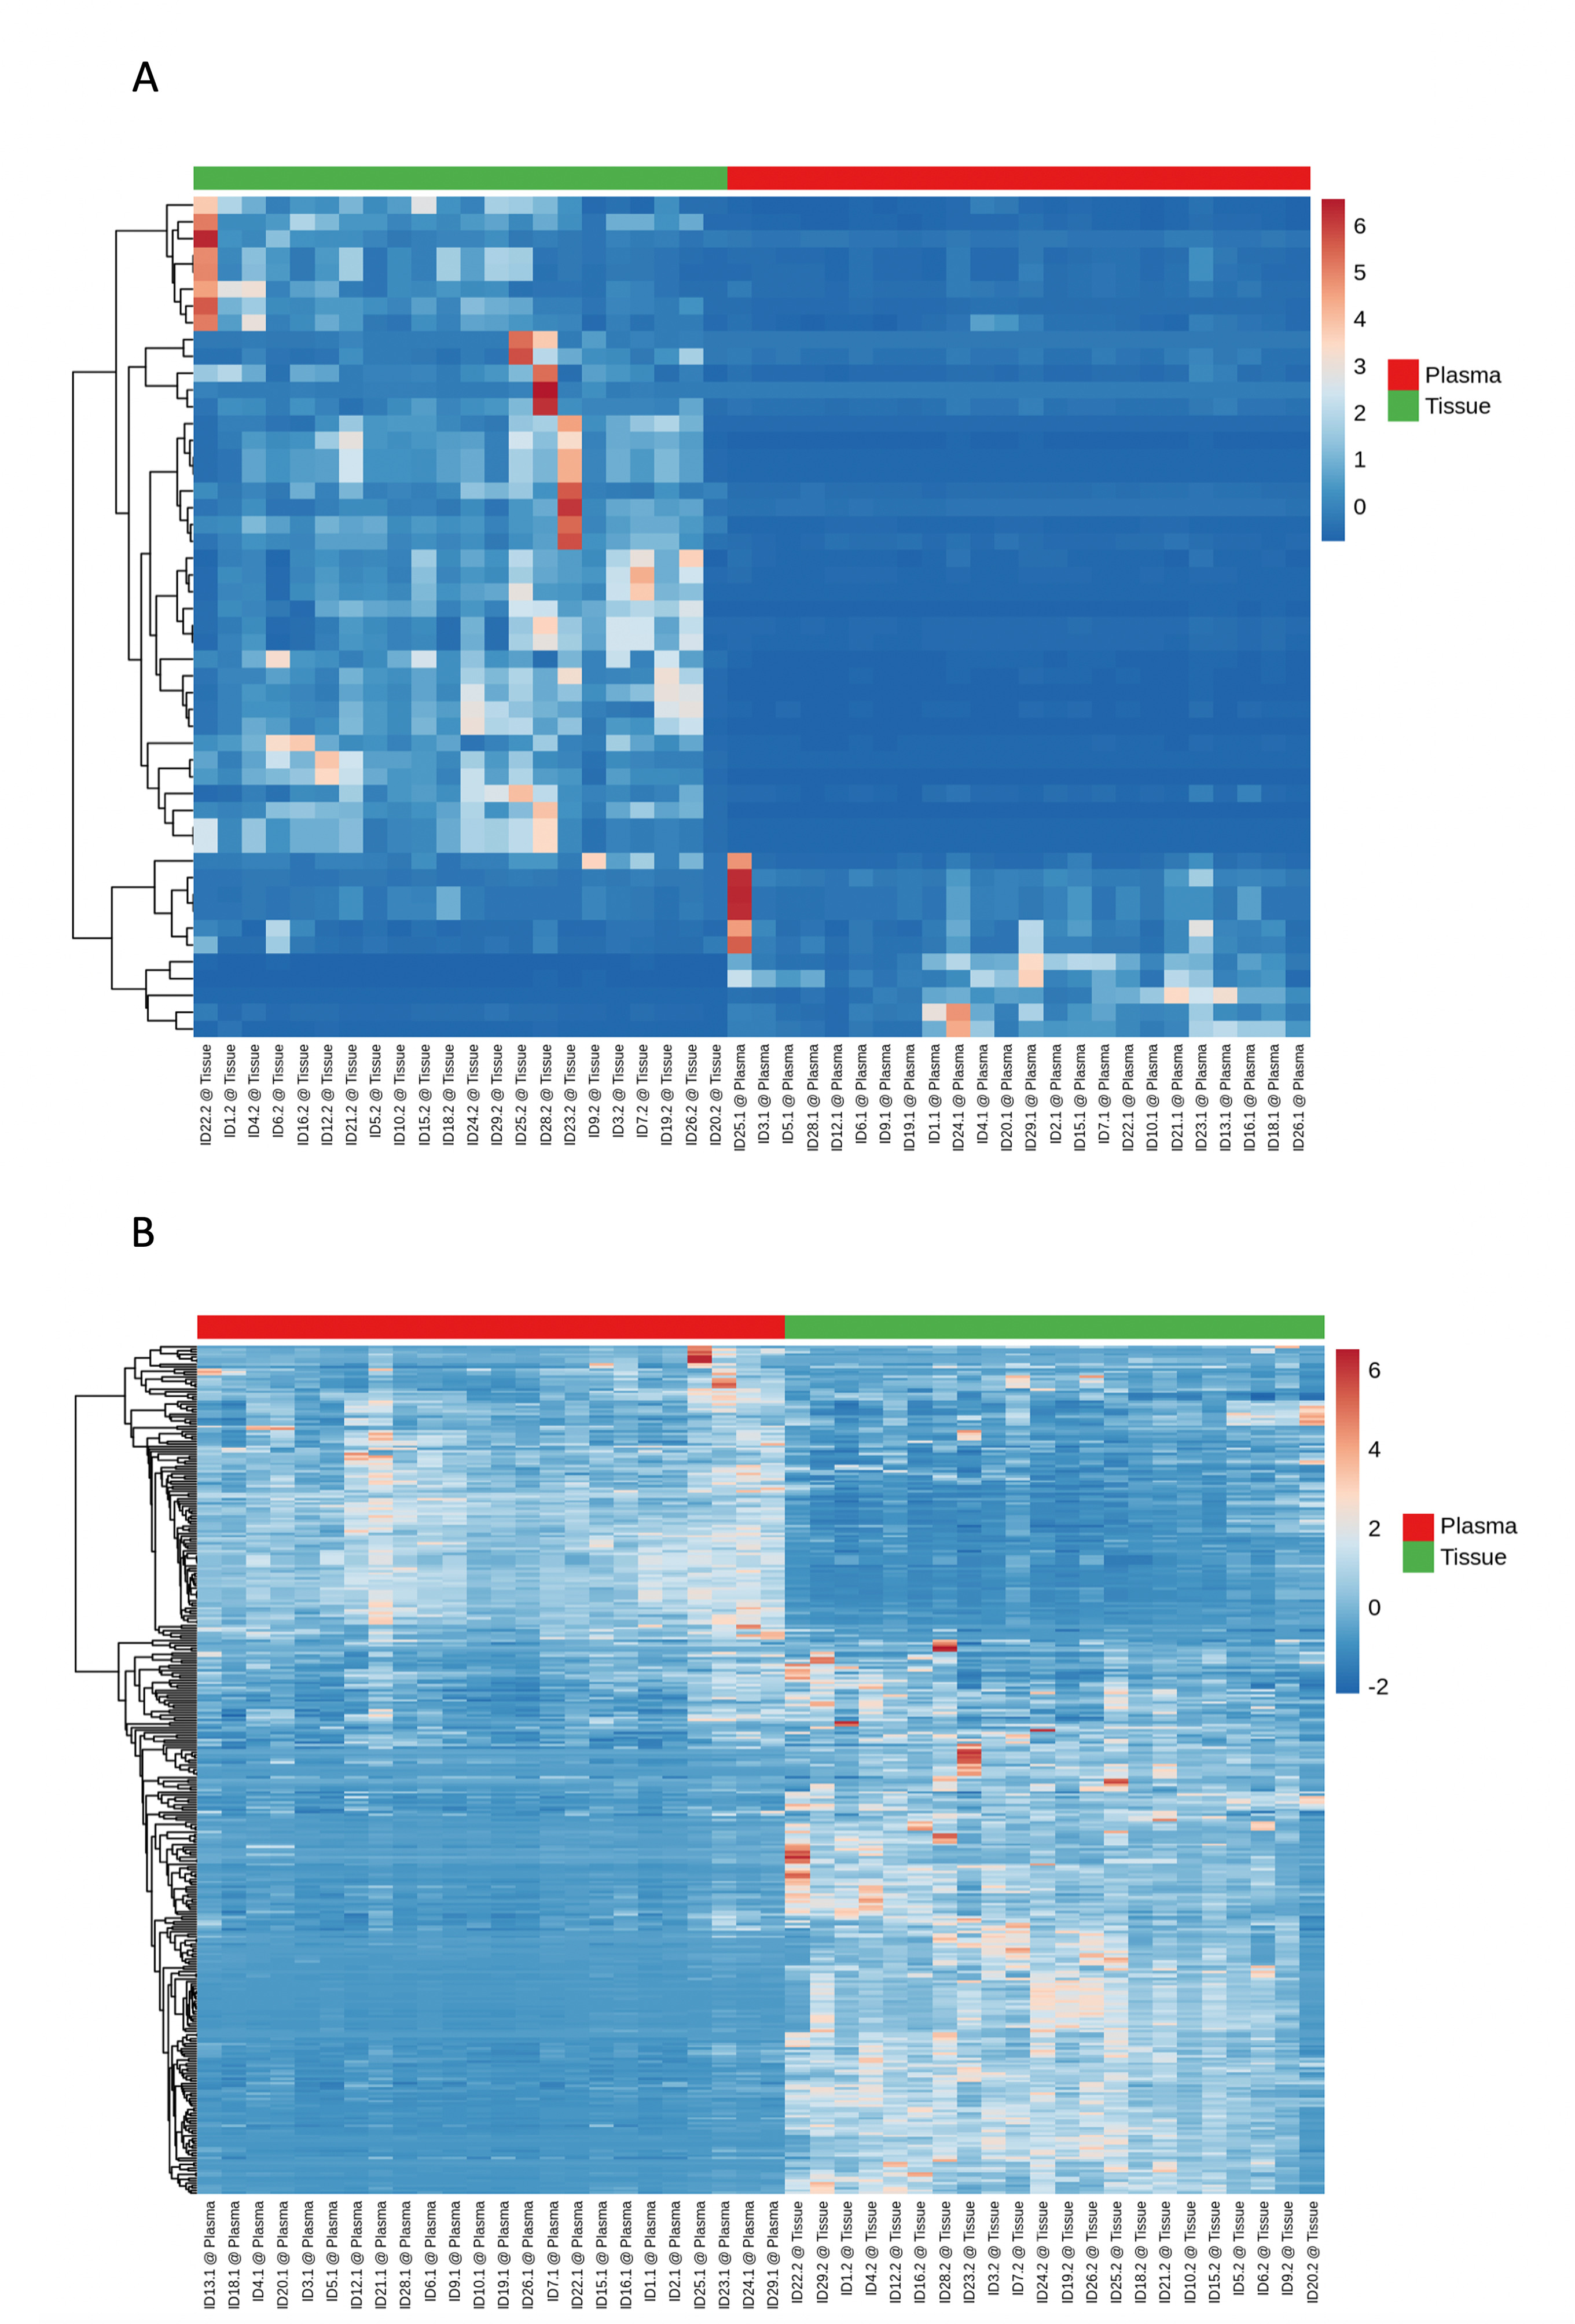 Fig. 4 
            a) This heatmap is for only the top 50 micro RNAs (miRNAs) (based on coefficient of variation (CV%)). An additional filter was introduced to increase the robustness: only miRNAs that showed reads assigned per million (RPM) in at least 1 /n (groups) percent of samples (e.g. with four groups, the miRNA has to have an RPM value above five in at least 25% of the samples). This removed miRNAs that had a high CV, but were only expressed in a too small amount of samples to have any statistical significance or biological relevance. b) A total of 341 miRNAs were shown in the other heatmap, based on the same filters described for the top 50 miRNAs. On the x-axis, plasma and tissue samples are depicted, whereas on the y-axis, the detected miRNAs are illustrated. On the top of the heatmaps, scale bar with plasma (red) and tissue (green) sections is demonstrated.
          